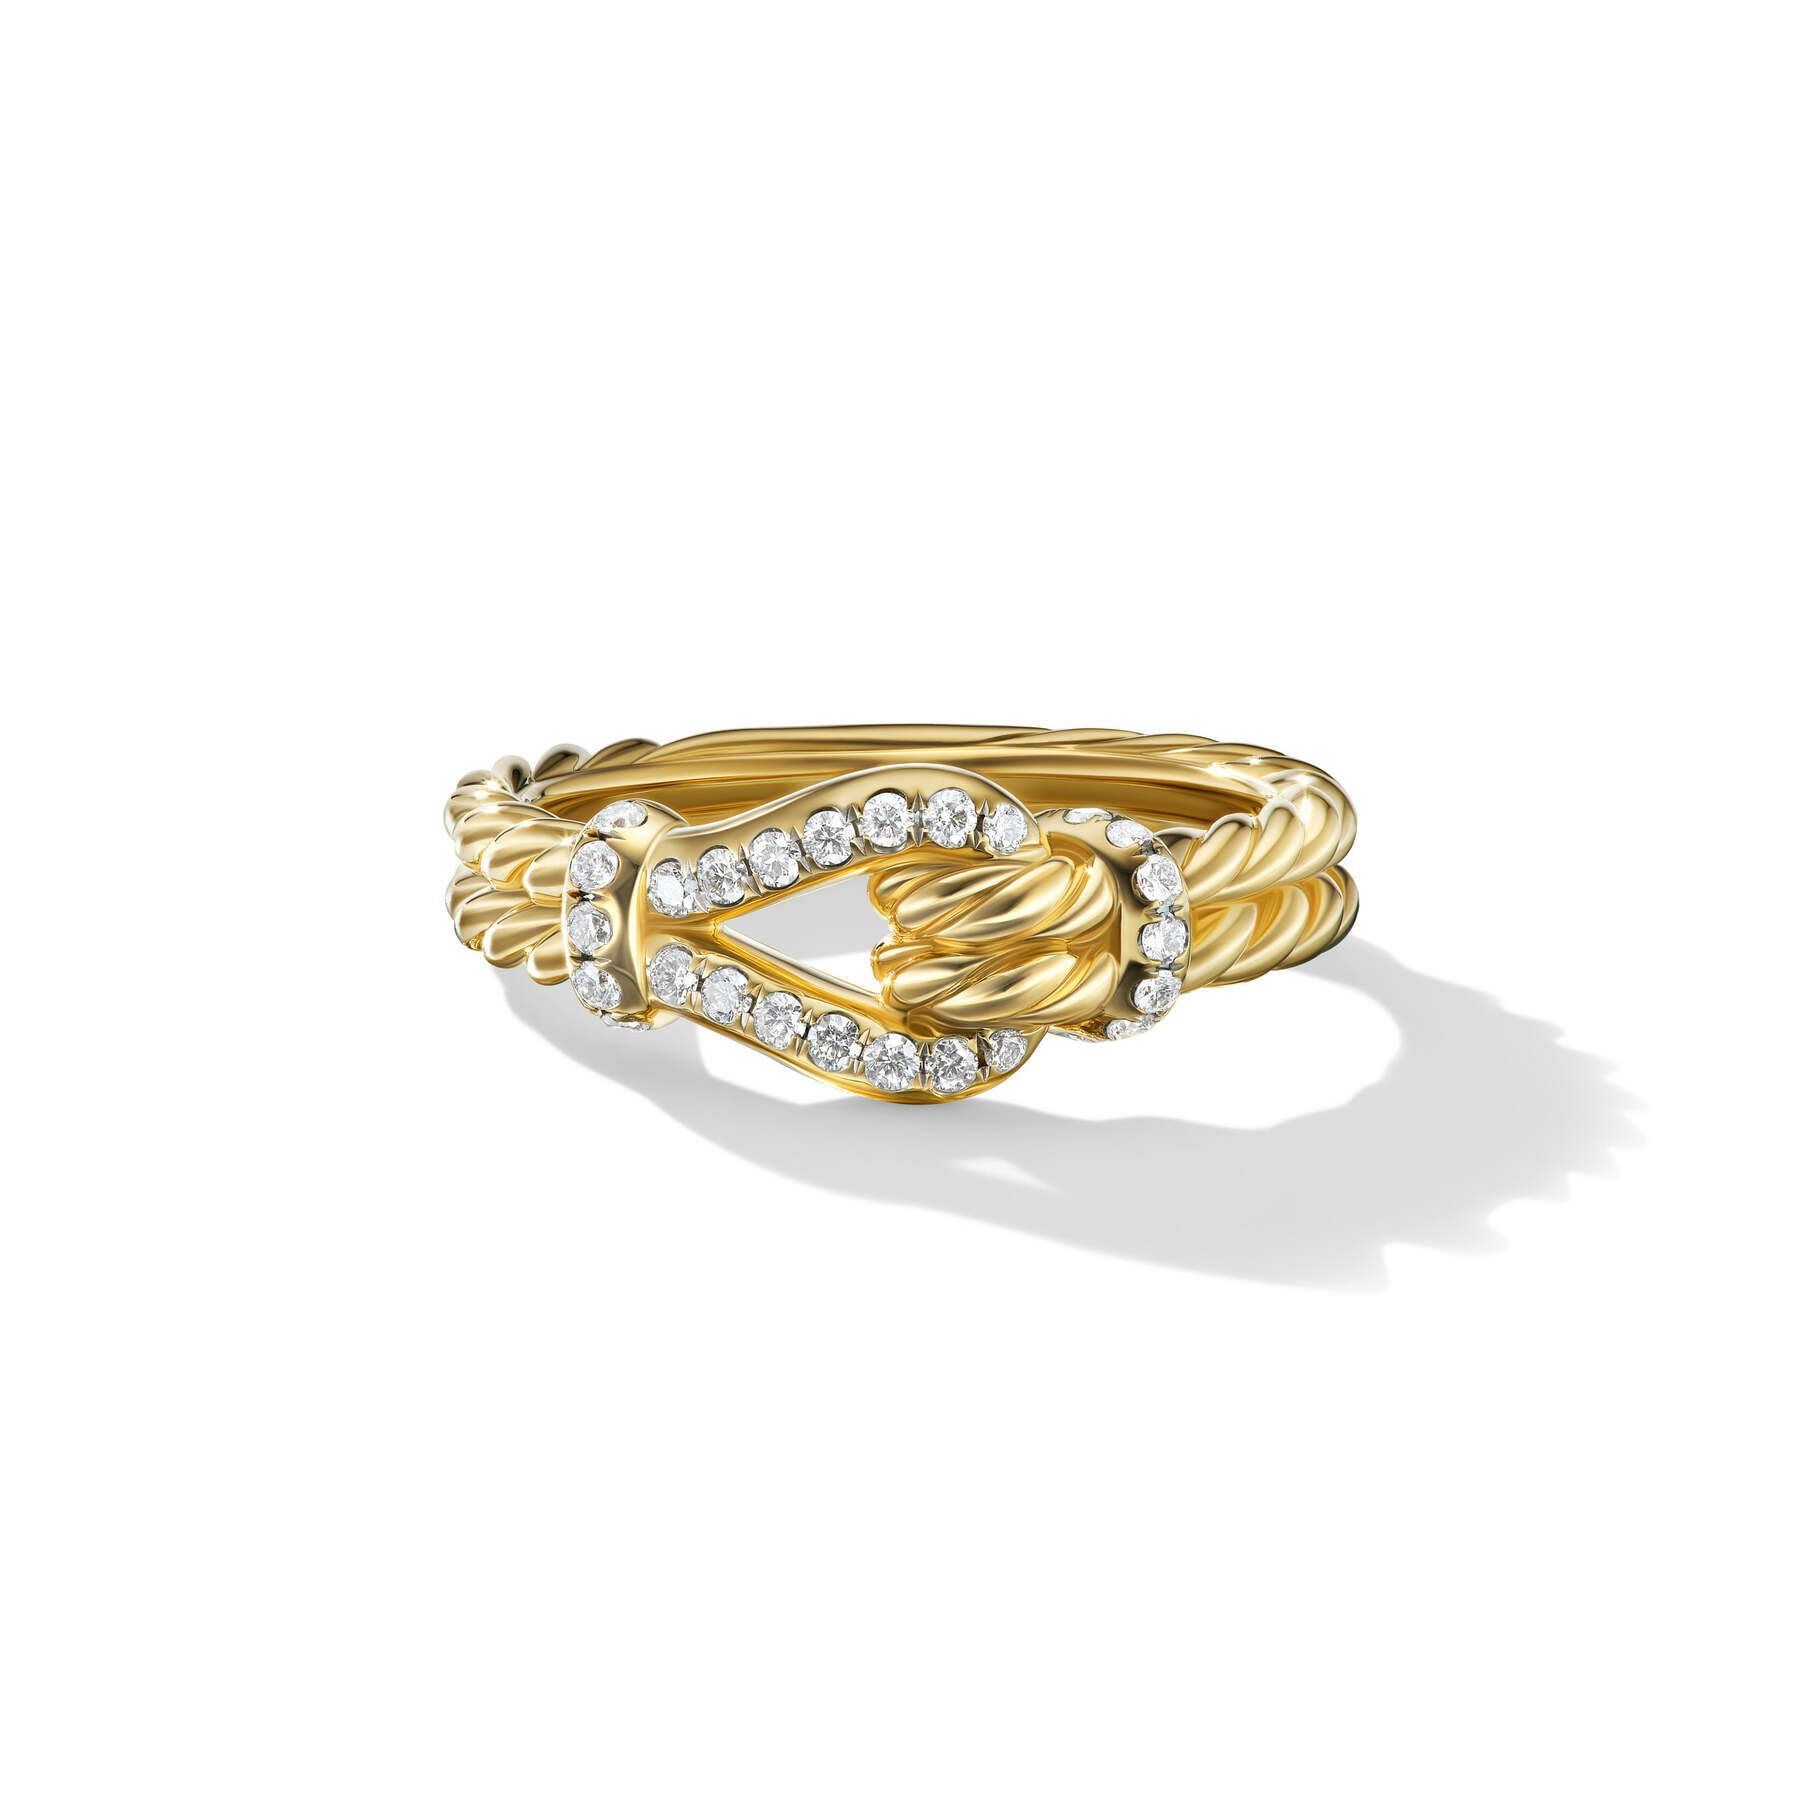 Thoroughbred Loop Ring in 18K Yellow Gold with Diamonds, 4mm